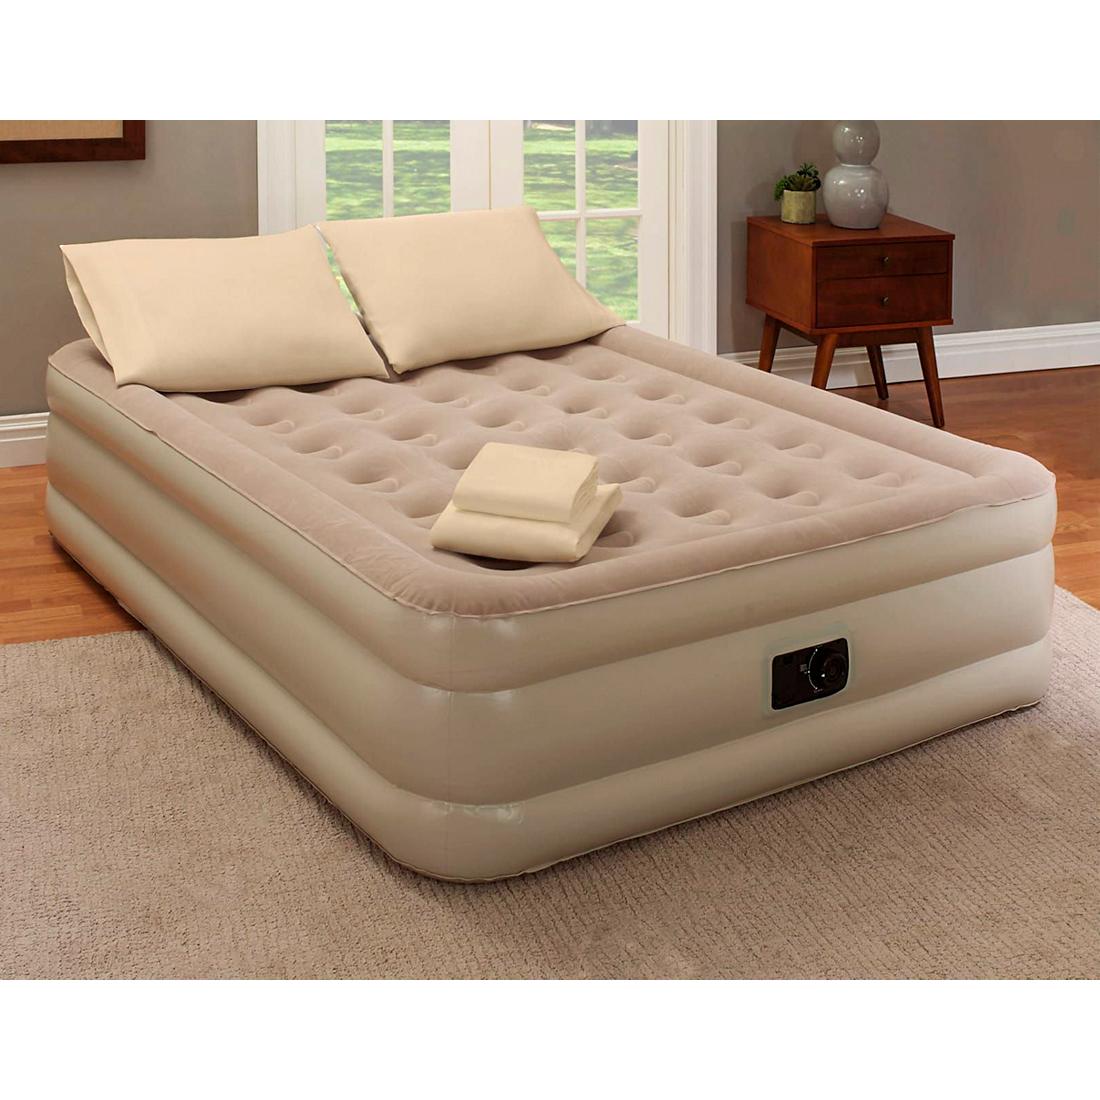 Why air beds are more reliable?